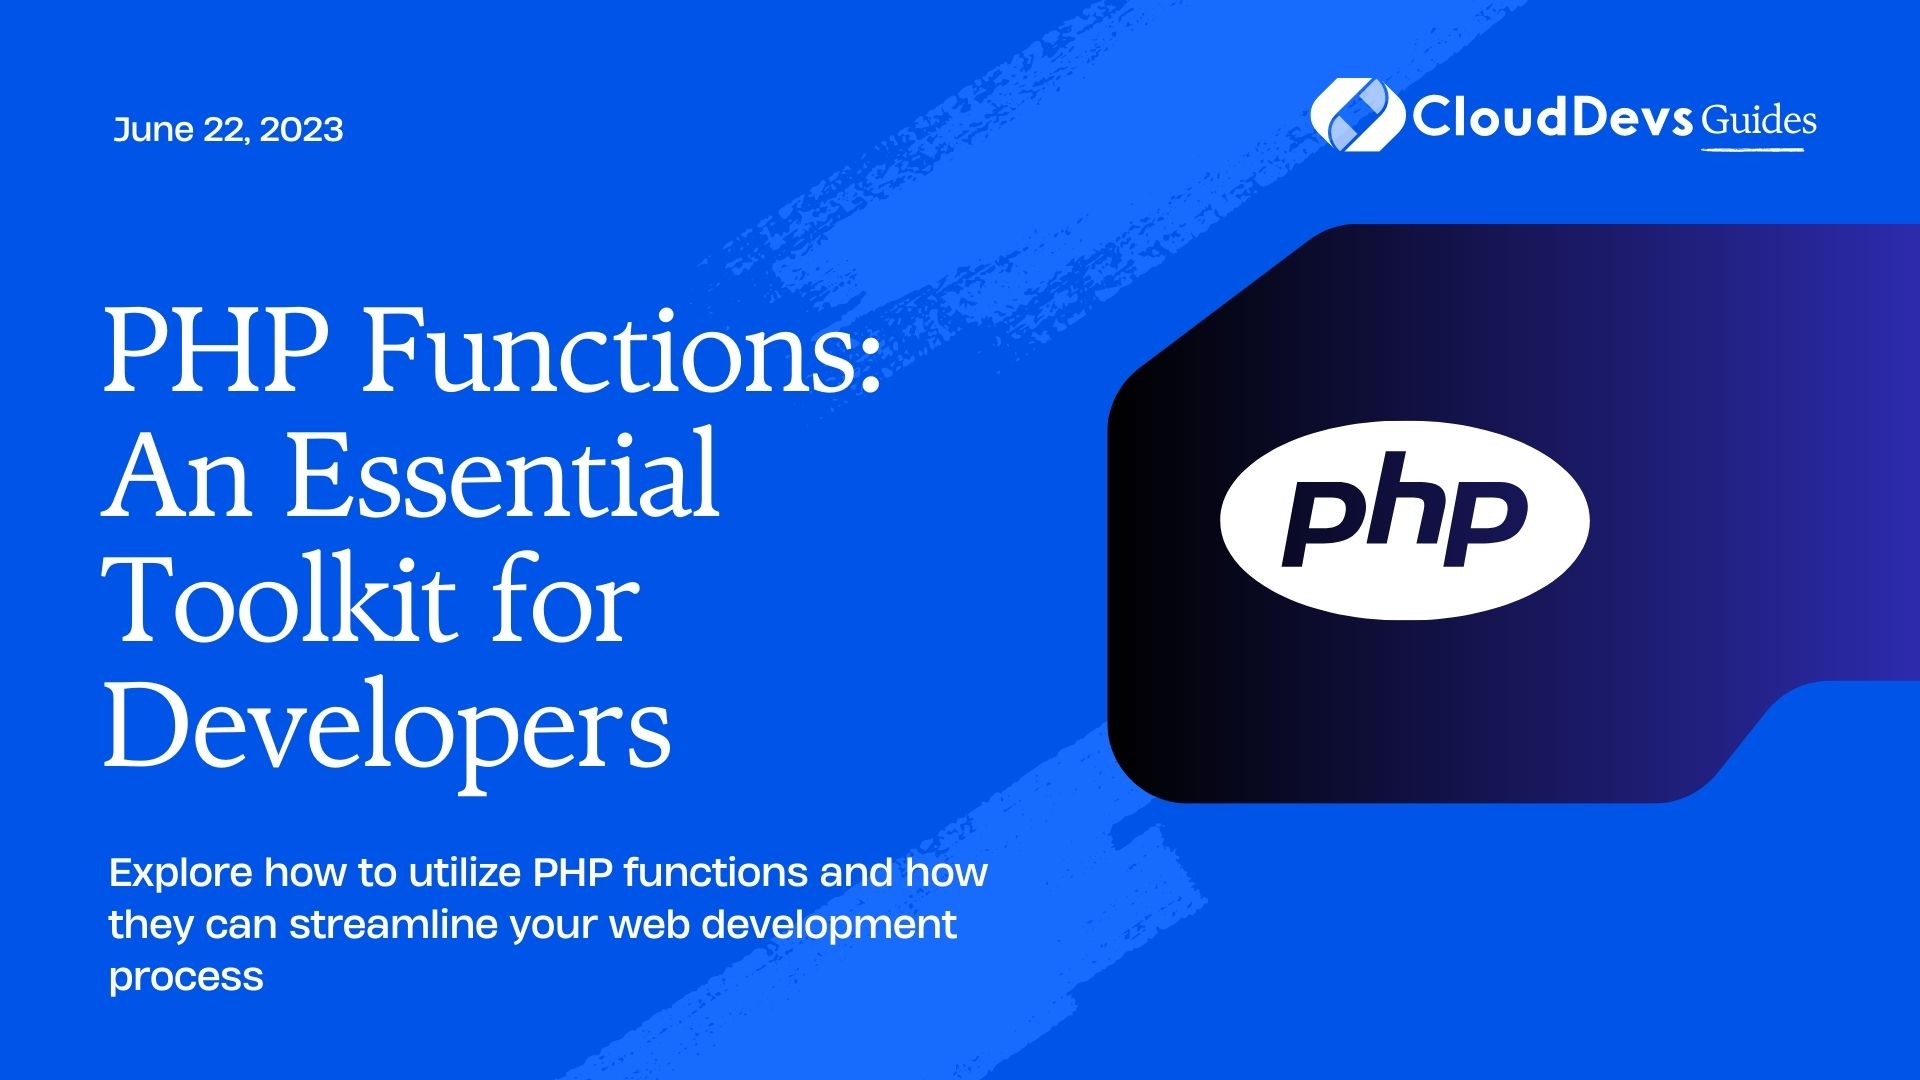 PHP Functions: An Essential Toolkit for Developers